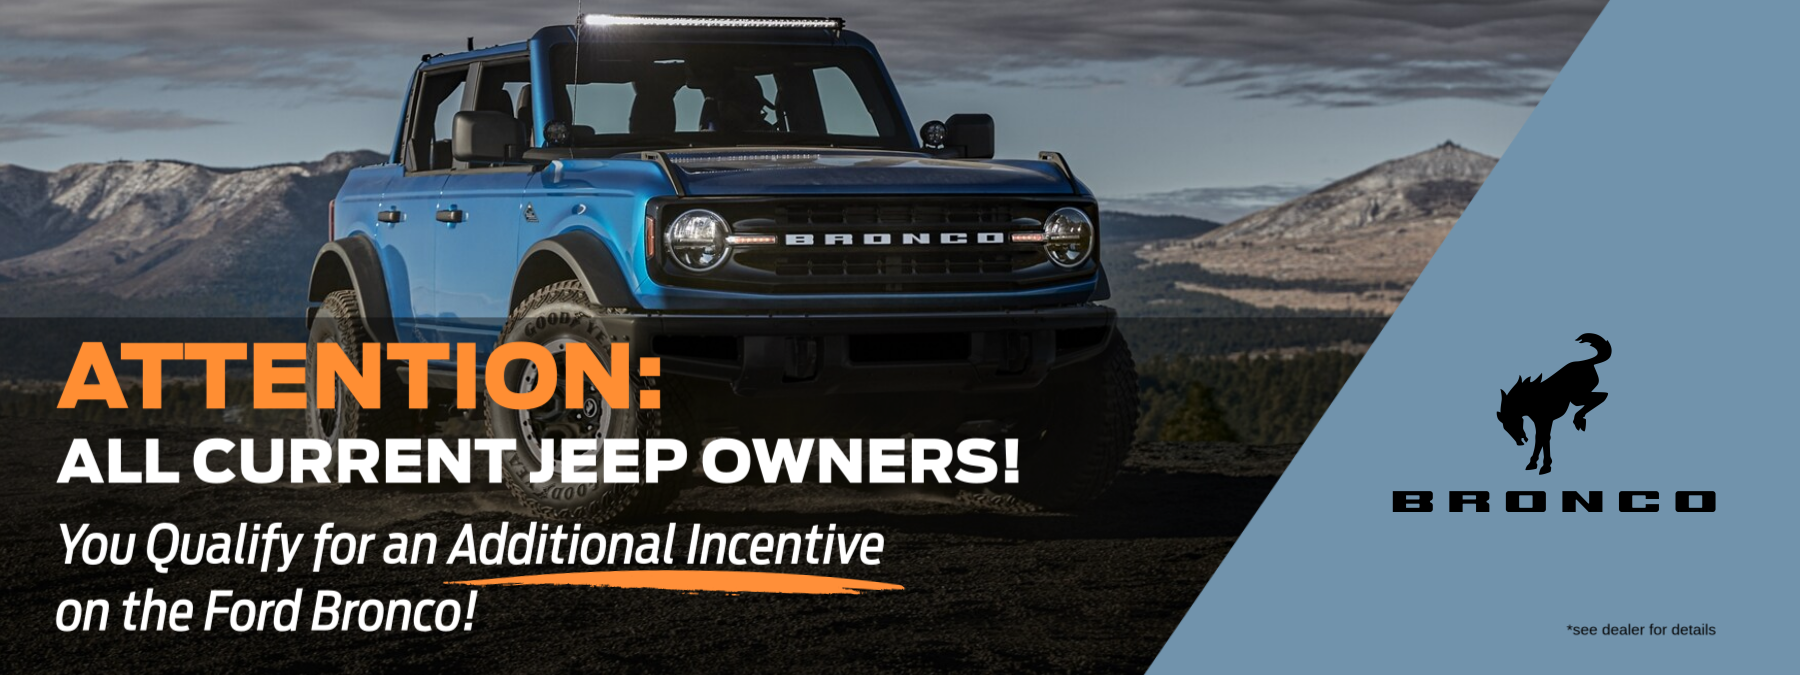 Jeep Owners Bronco Offer